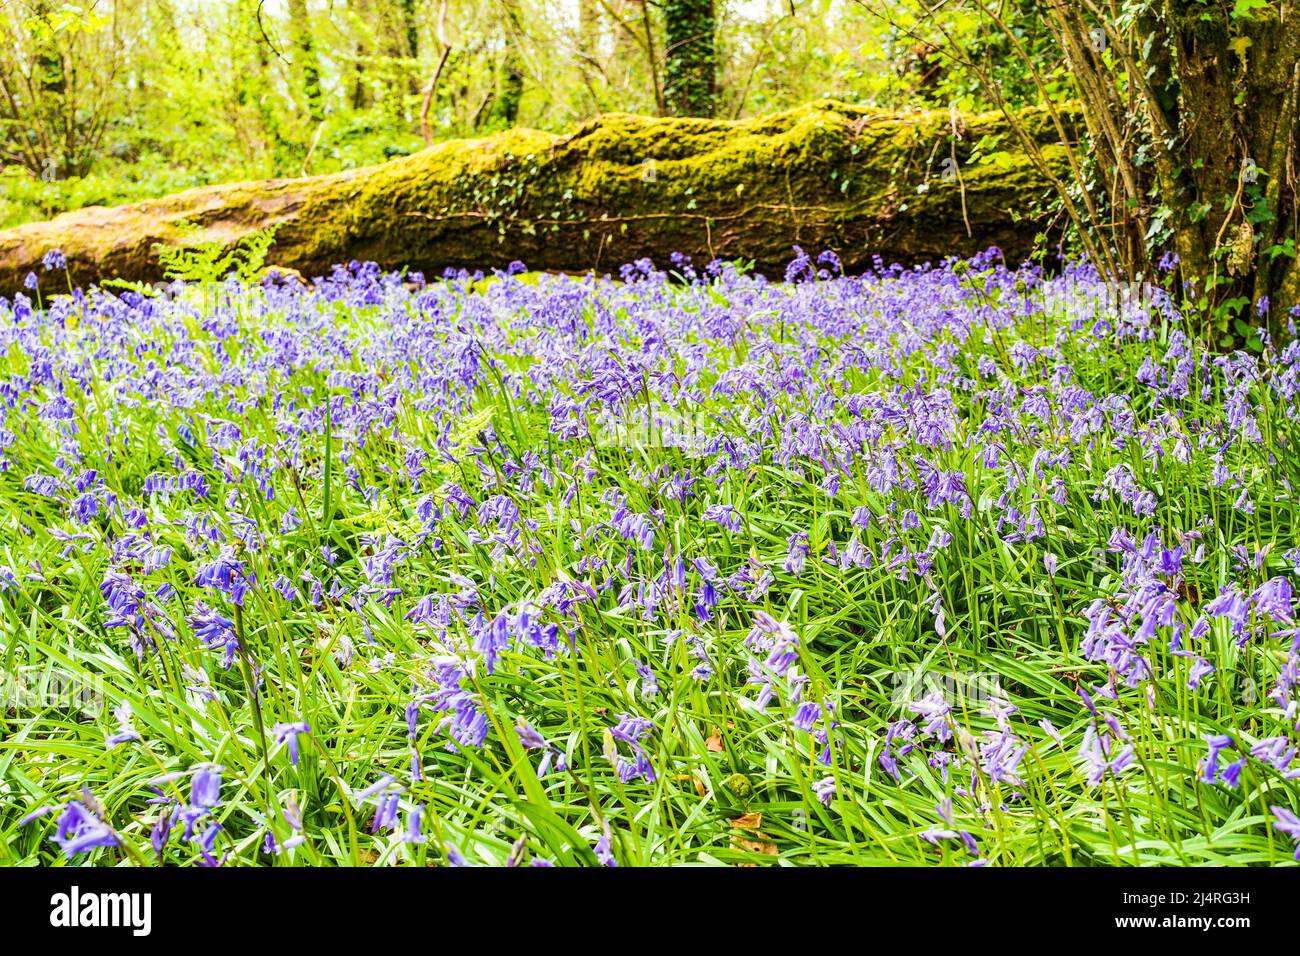 Carpet of bluebells in a Welsh woodland in April Stock Photo